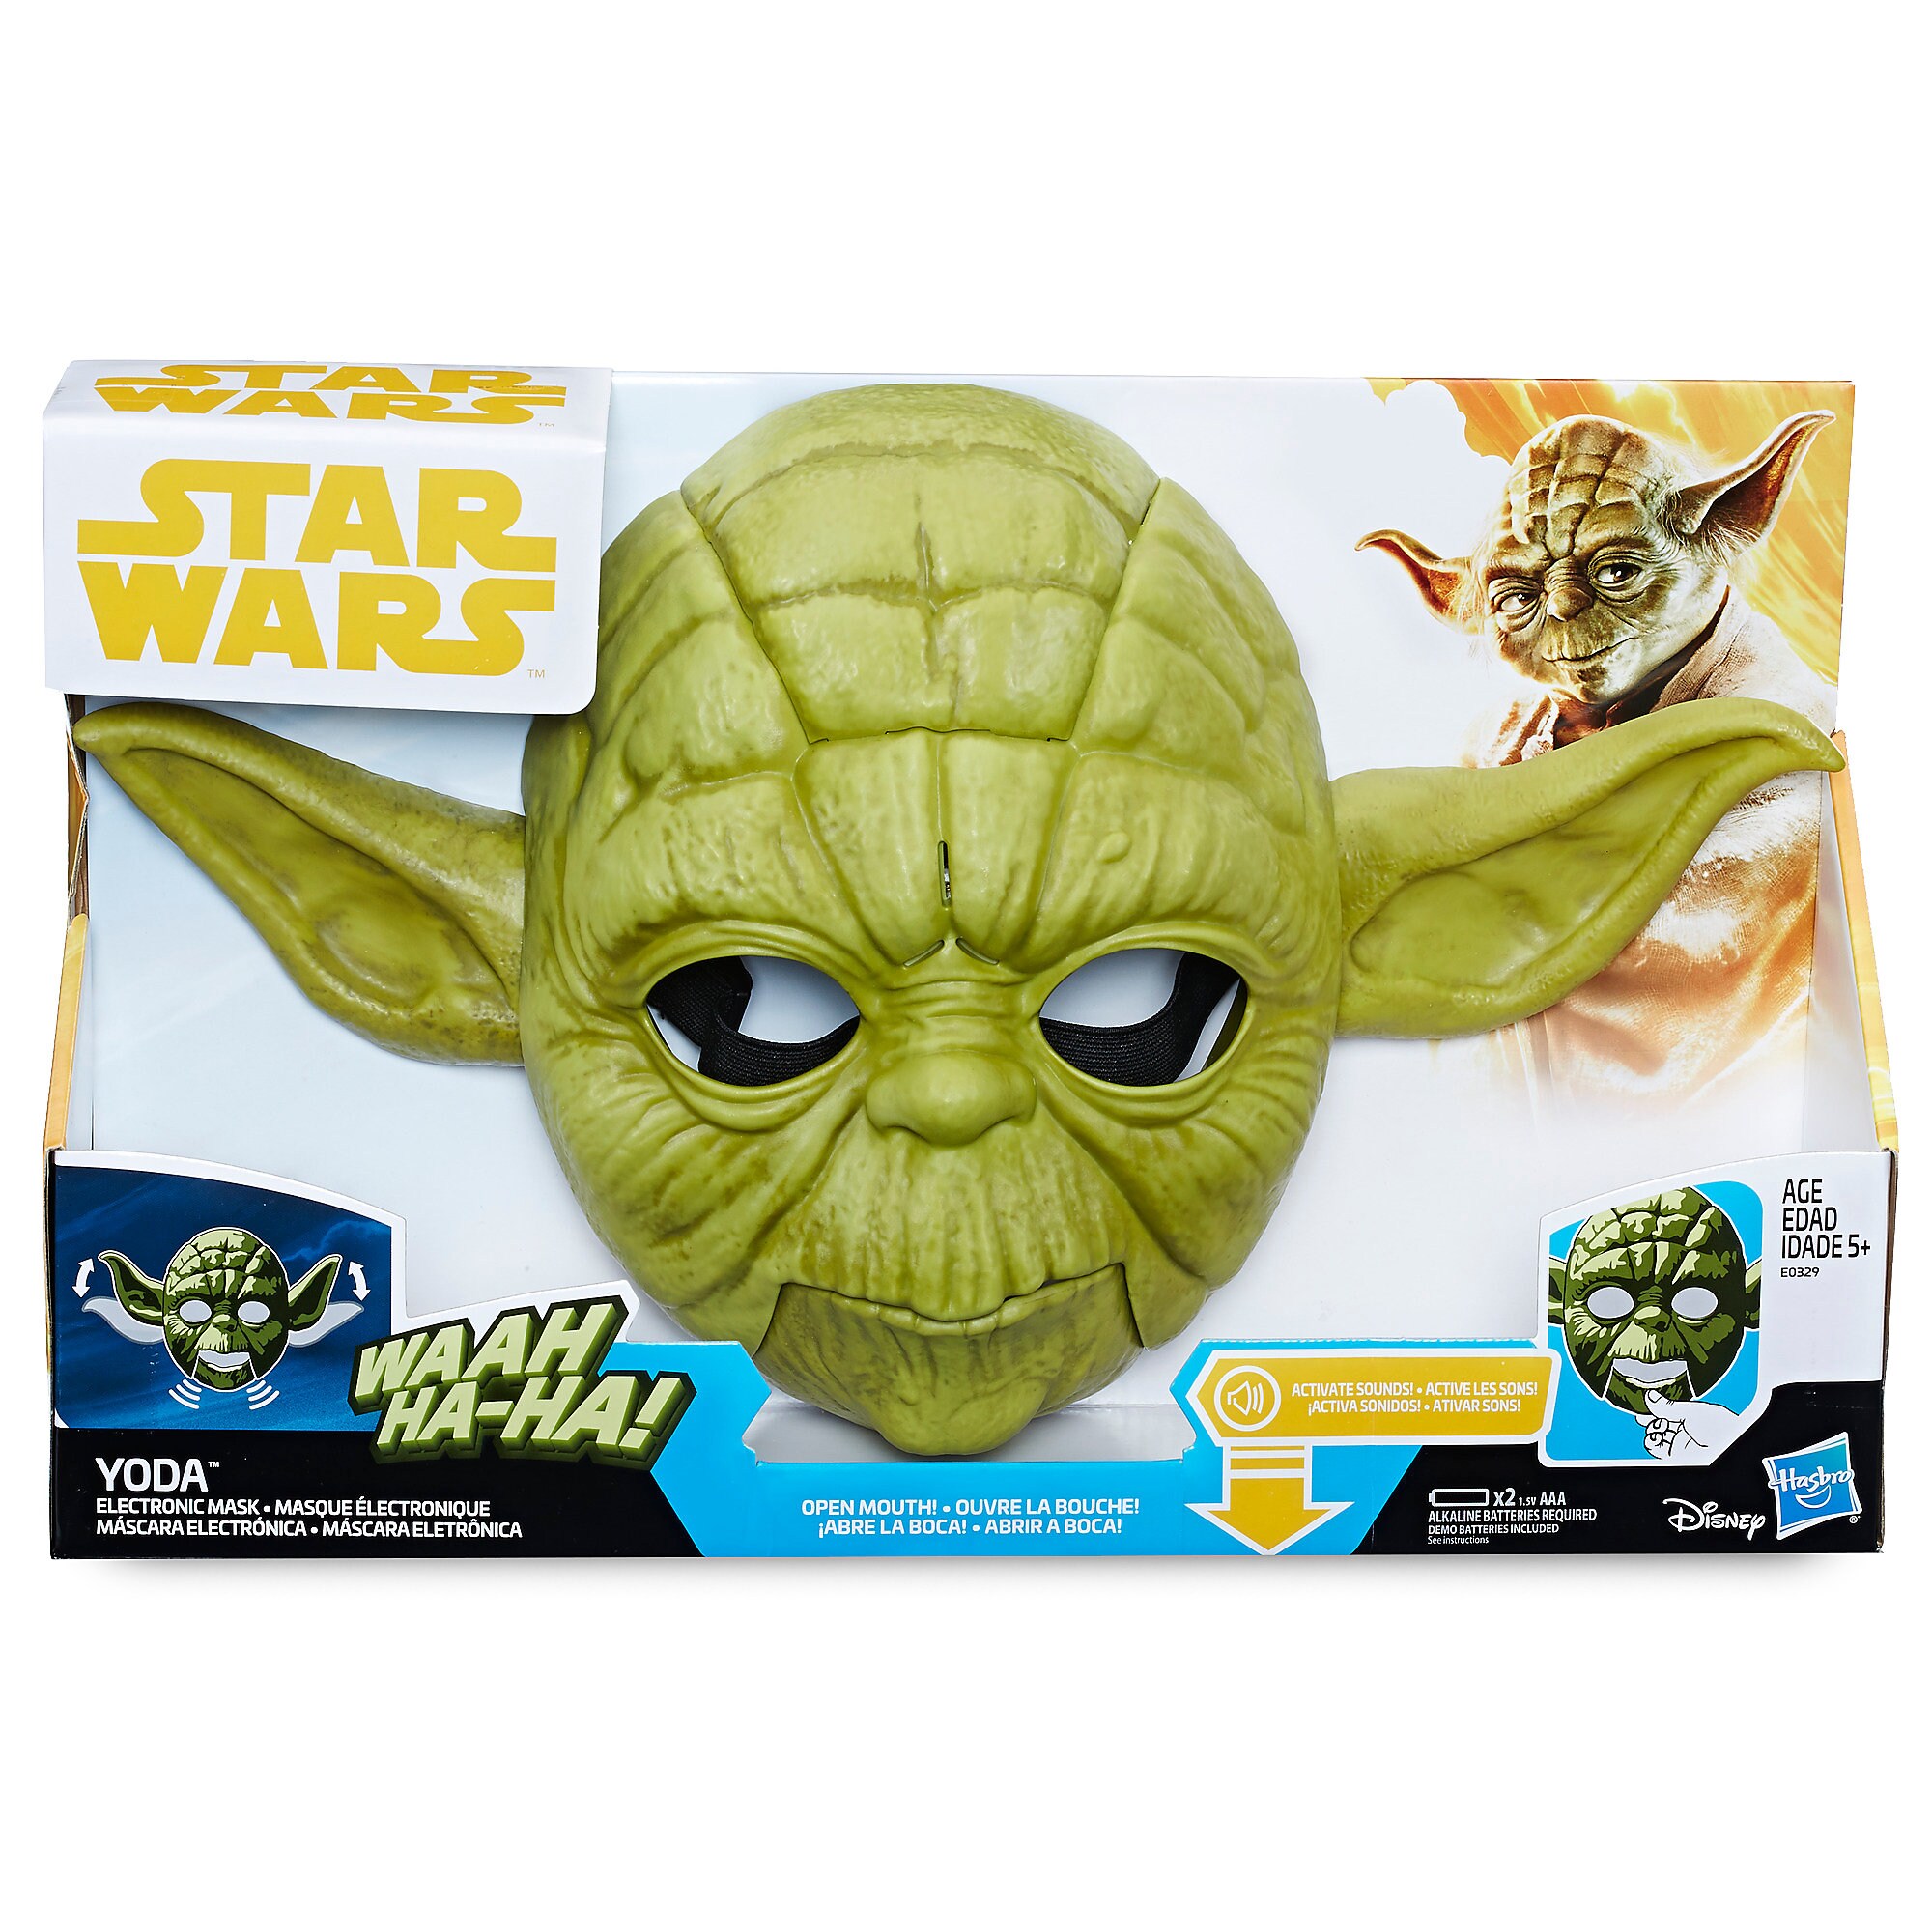 Yoda Electronic Mask for Kids by Hasbro - Star Wars